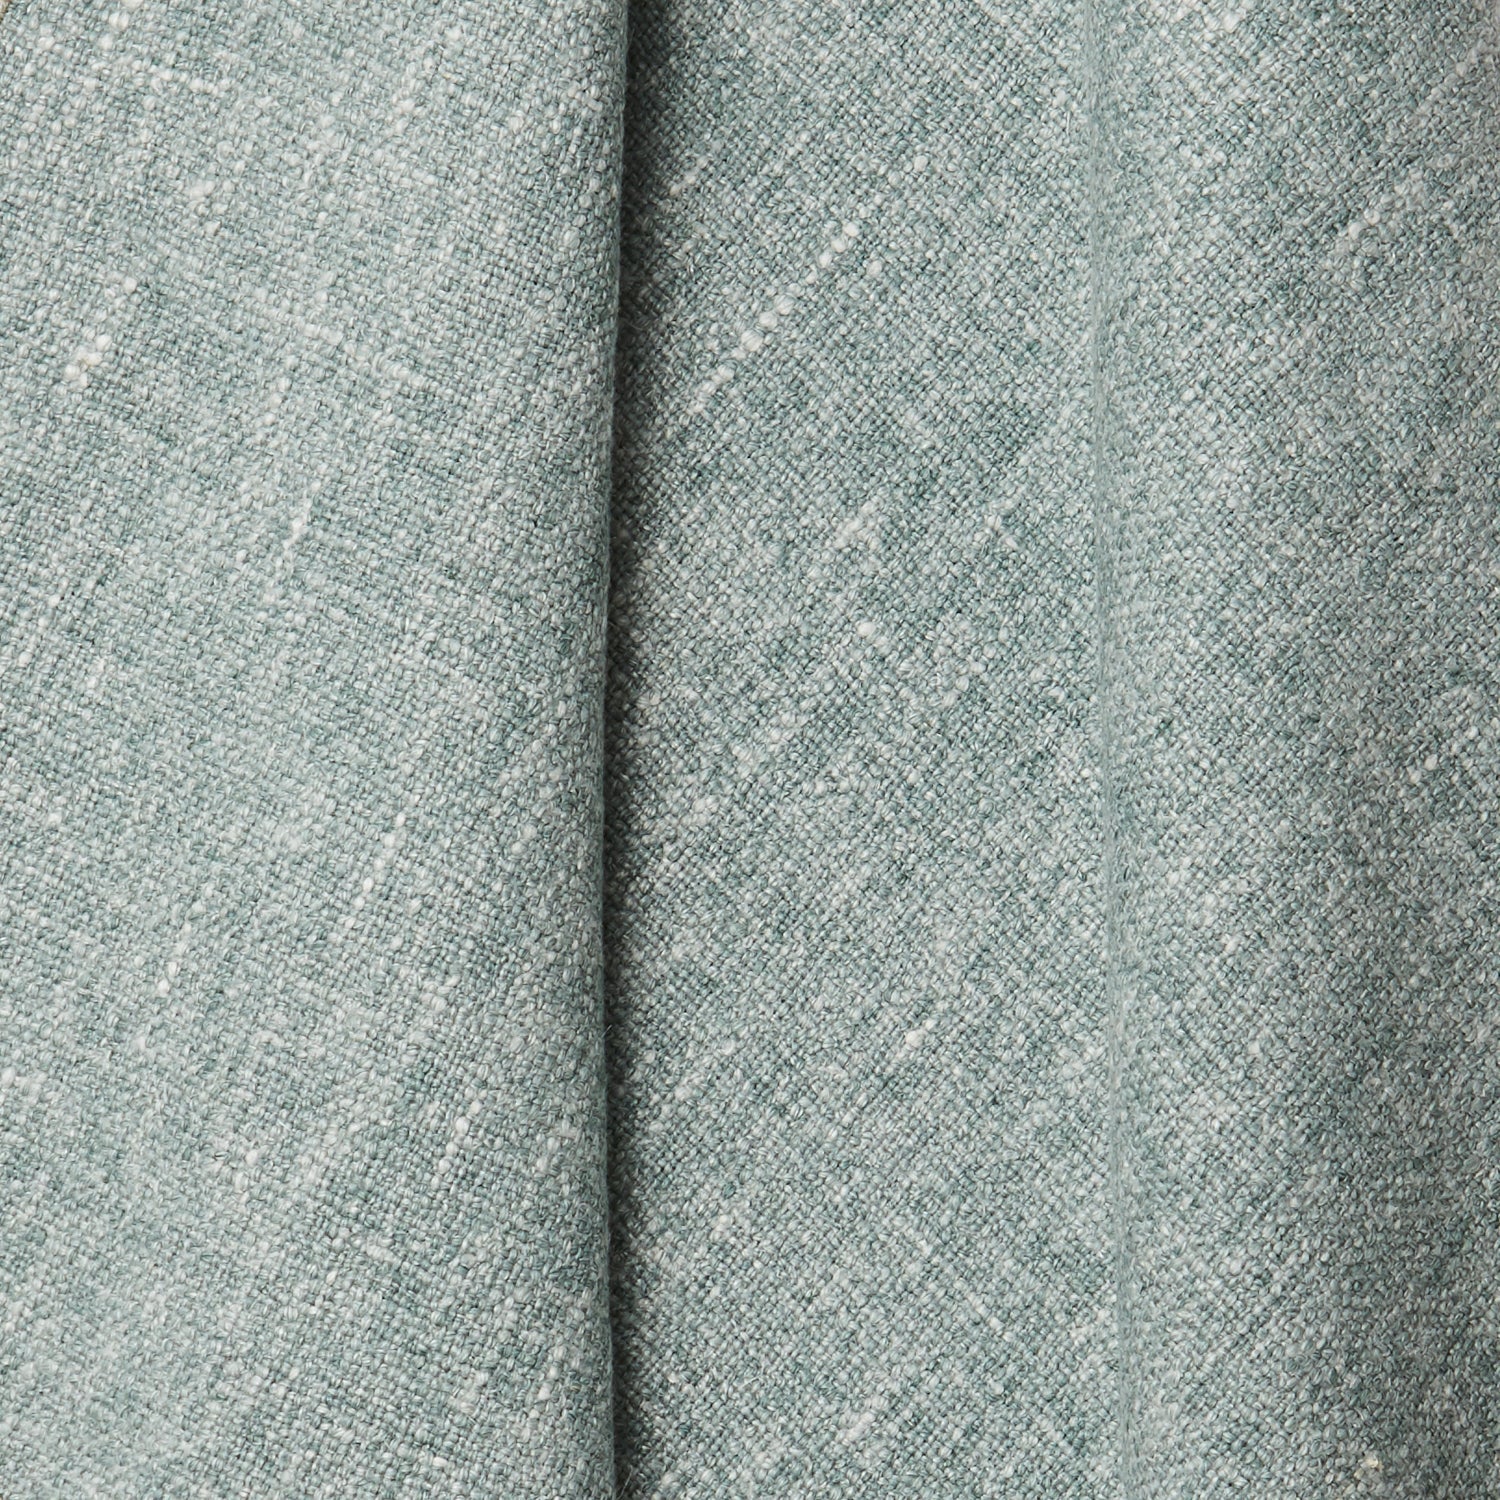 A draped swatch of blended linen fabric in a mottled light jade color.